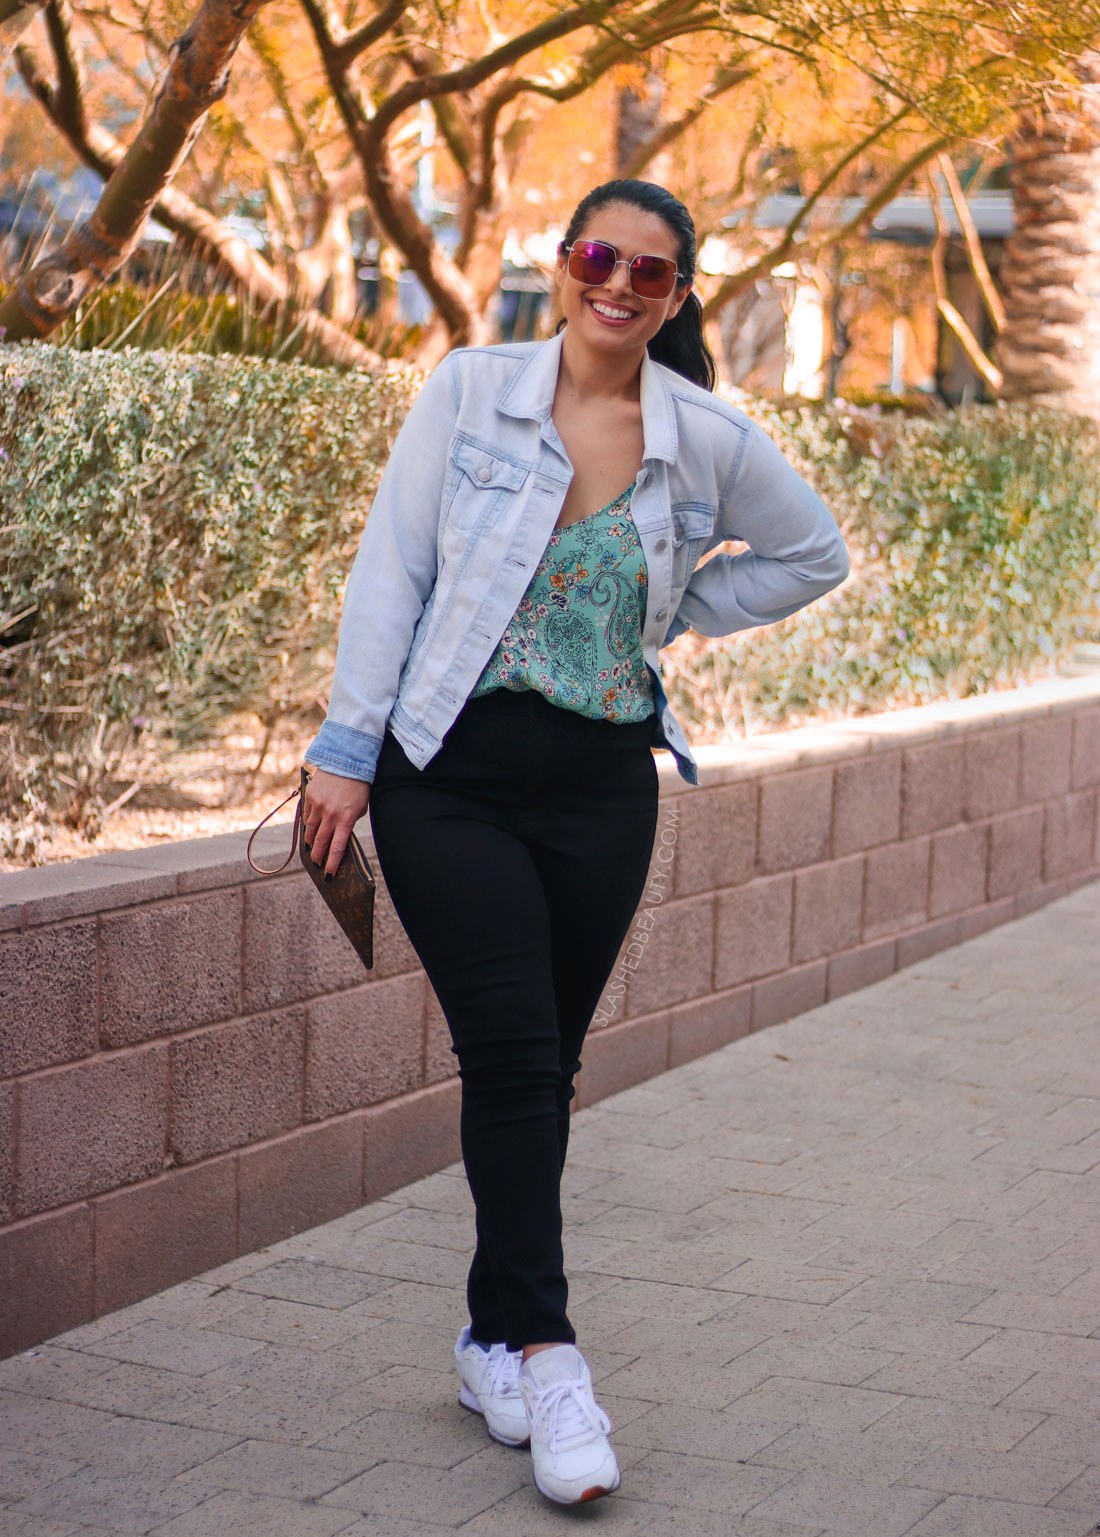 Denim jacket outfit for fall: colorful top, black jeans, white sneakers. | Create More Outfits with 3 Outerwear Essentials | Slashed Beauty